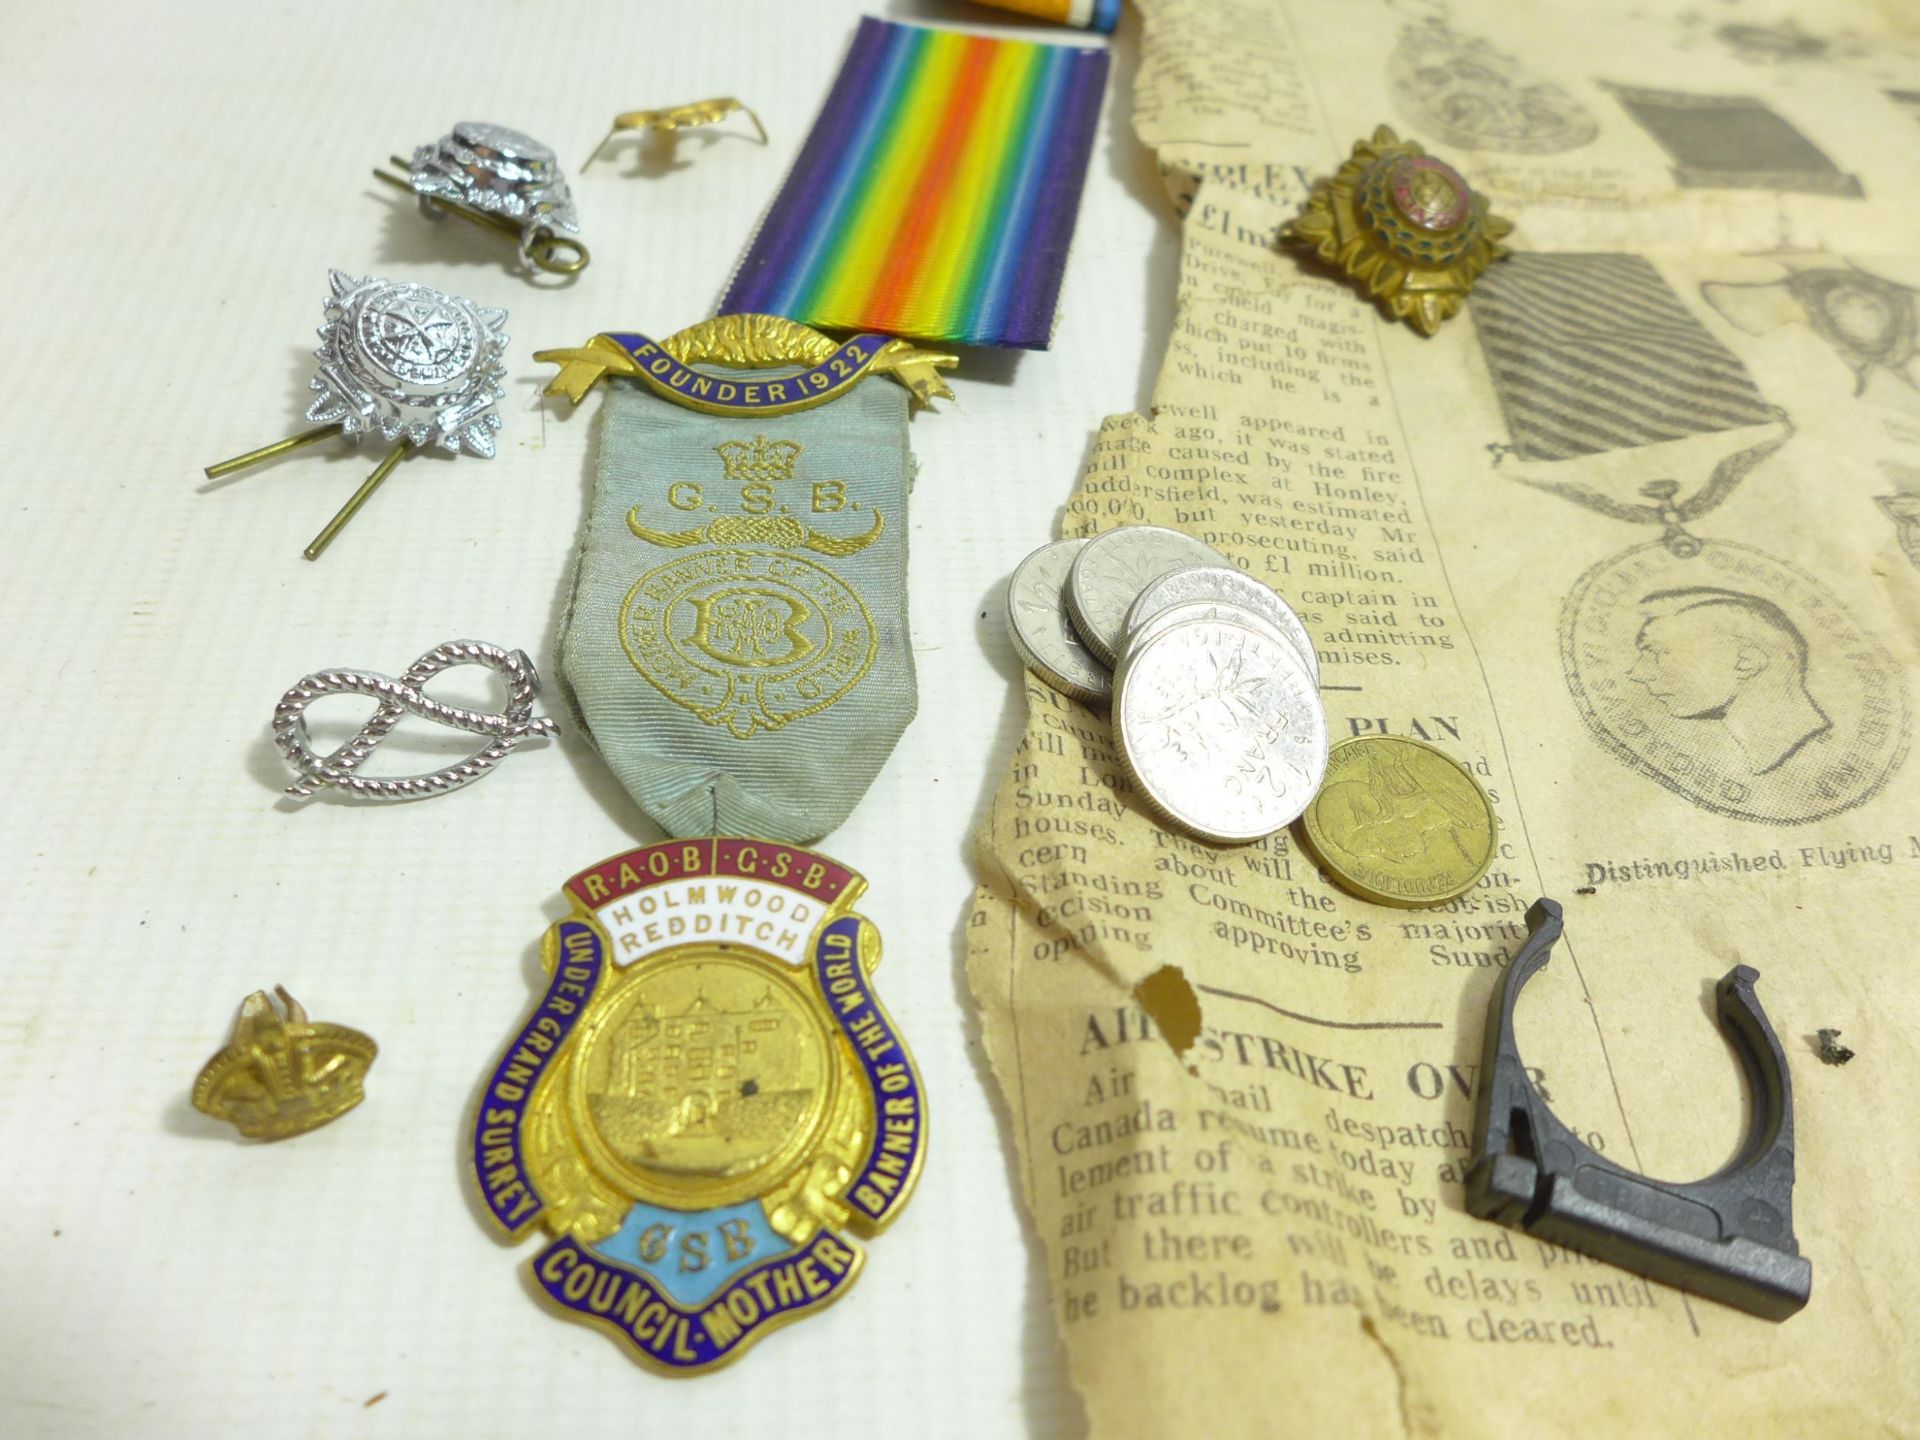 A COLLECTION OF MILITARY BADGES, MEDAL RIBBONS, HORSE BRASSSES ETC - Image 4 of 4